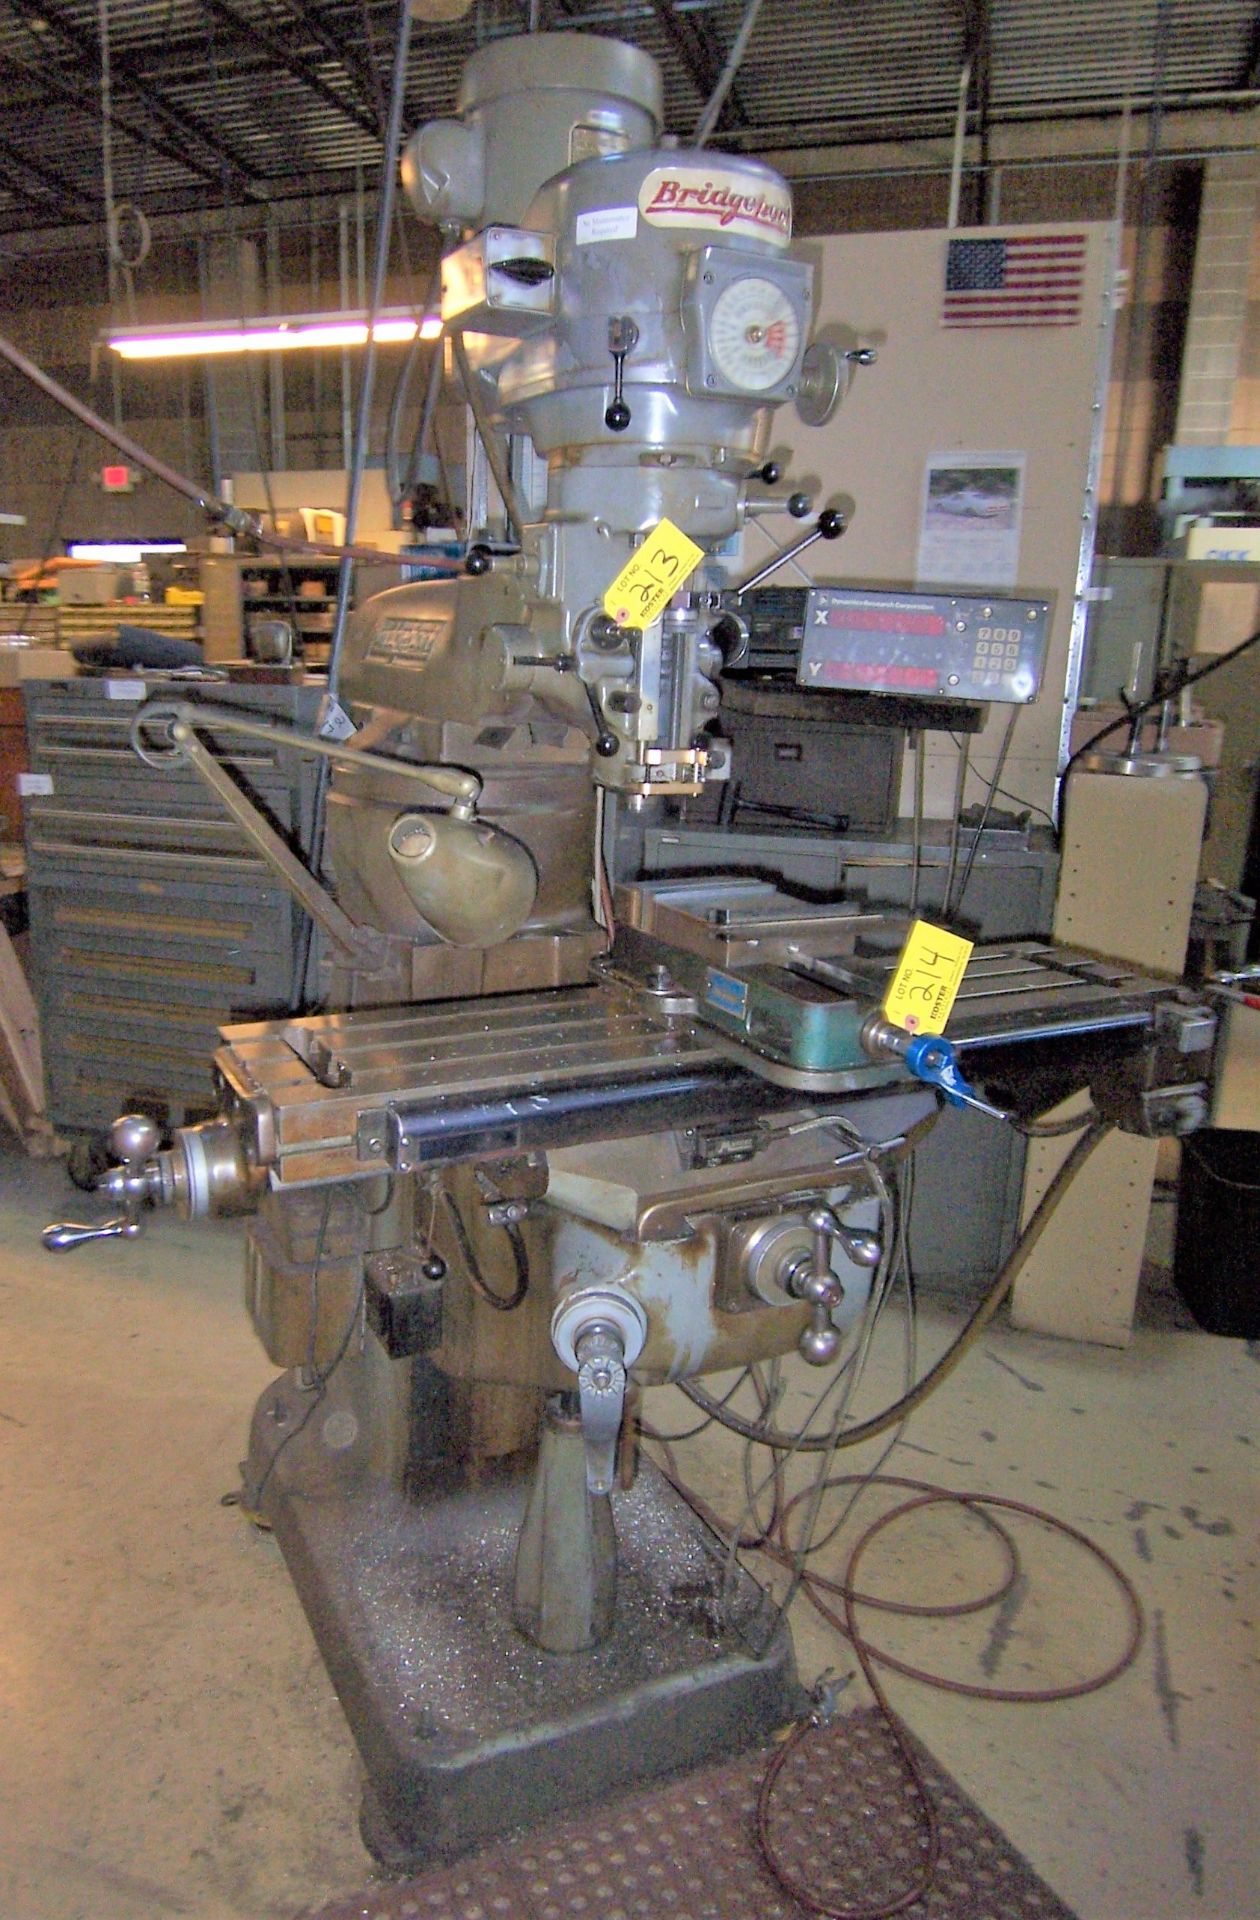 BRIDGEPORT VERTICAL MILLING MACHINE, WITH 9" X 42" POWER FEED TABLE, SPINDLE SPEEDS 60-4200 RPM, DRC